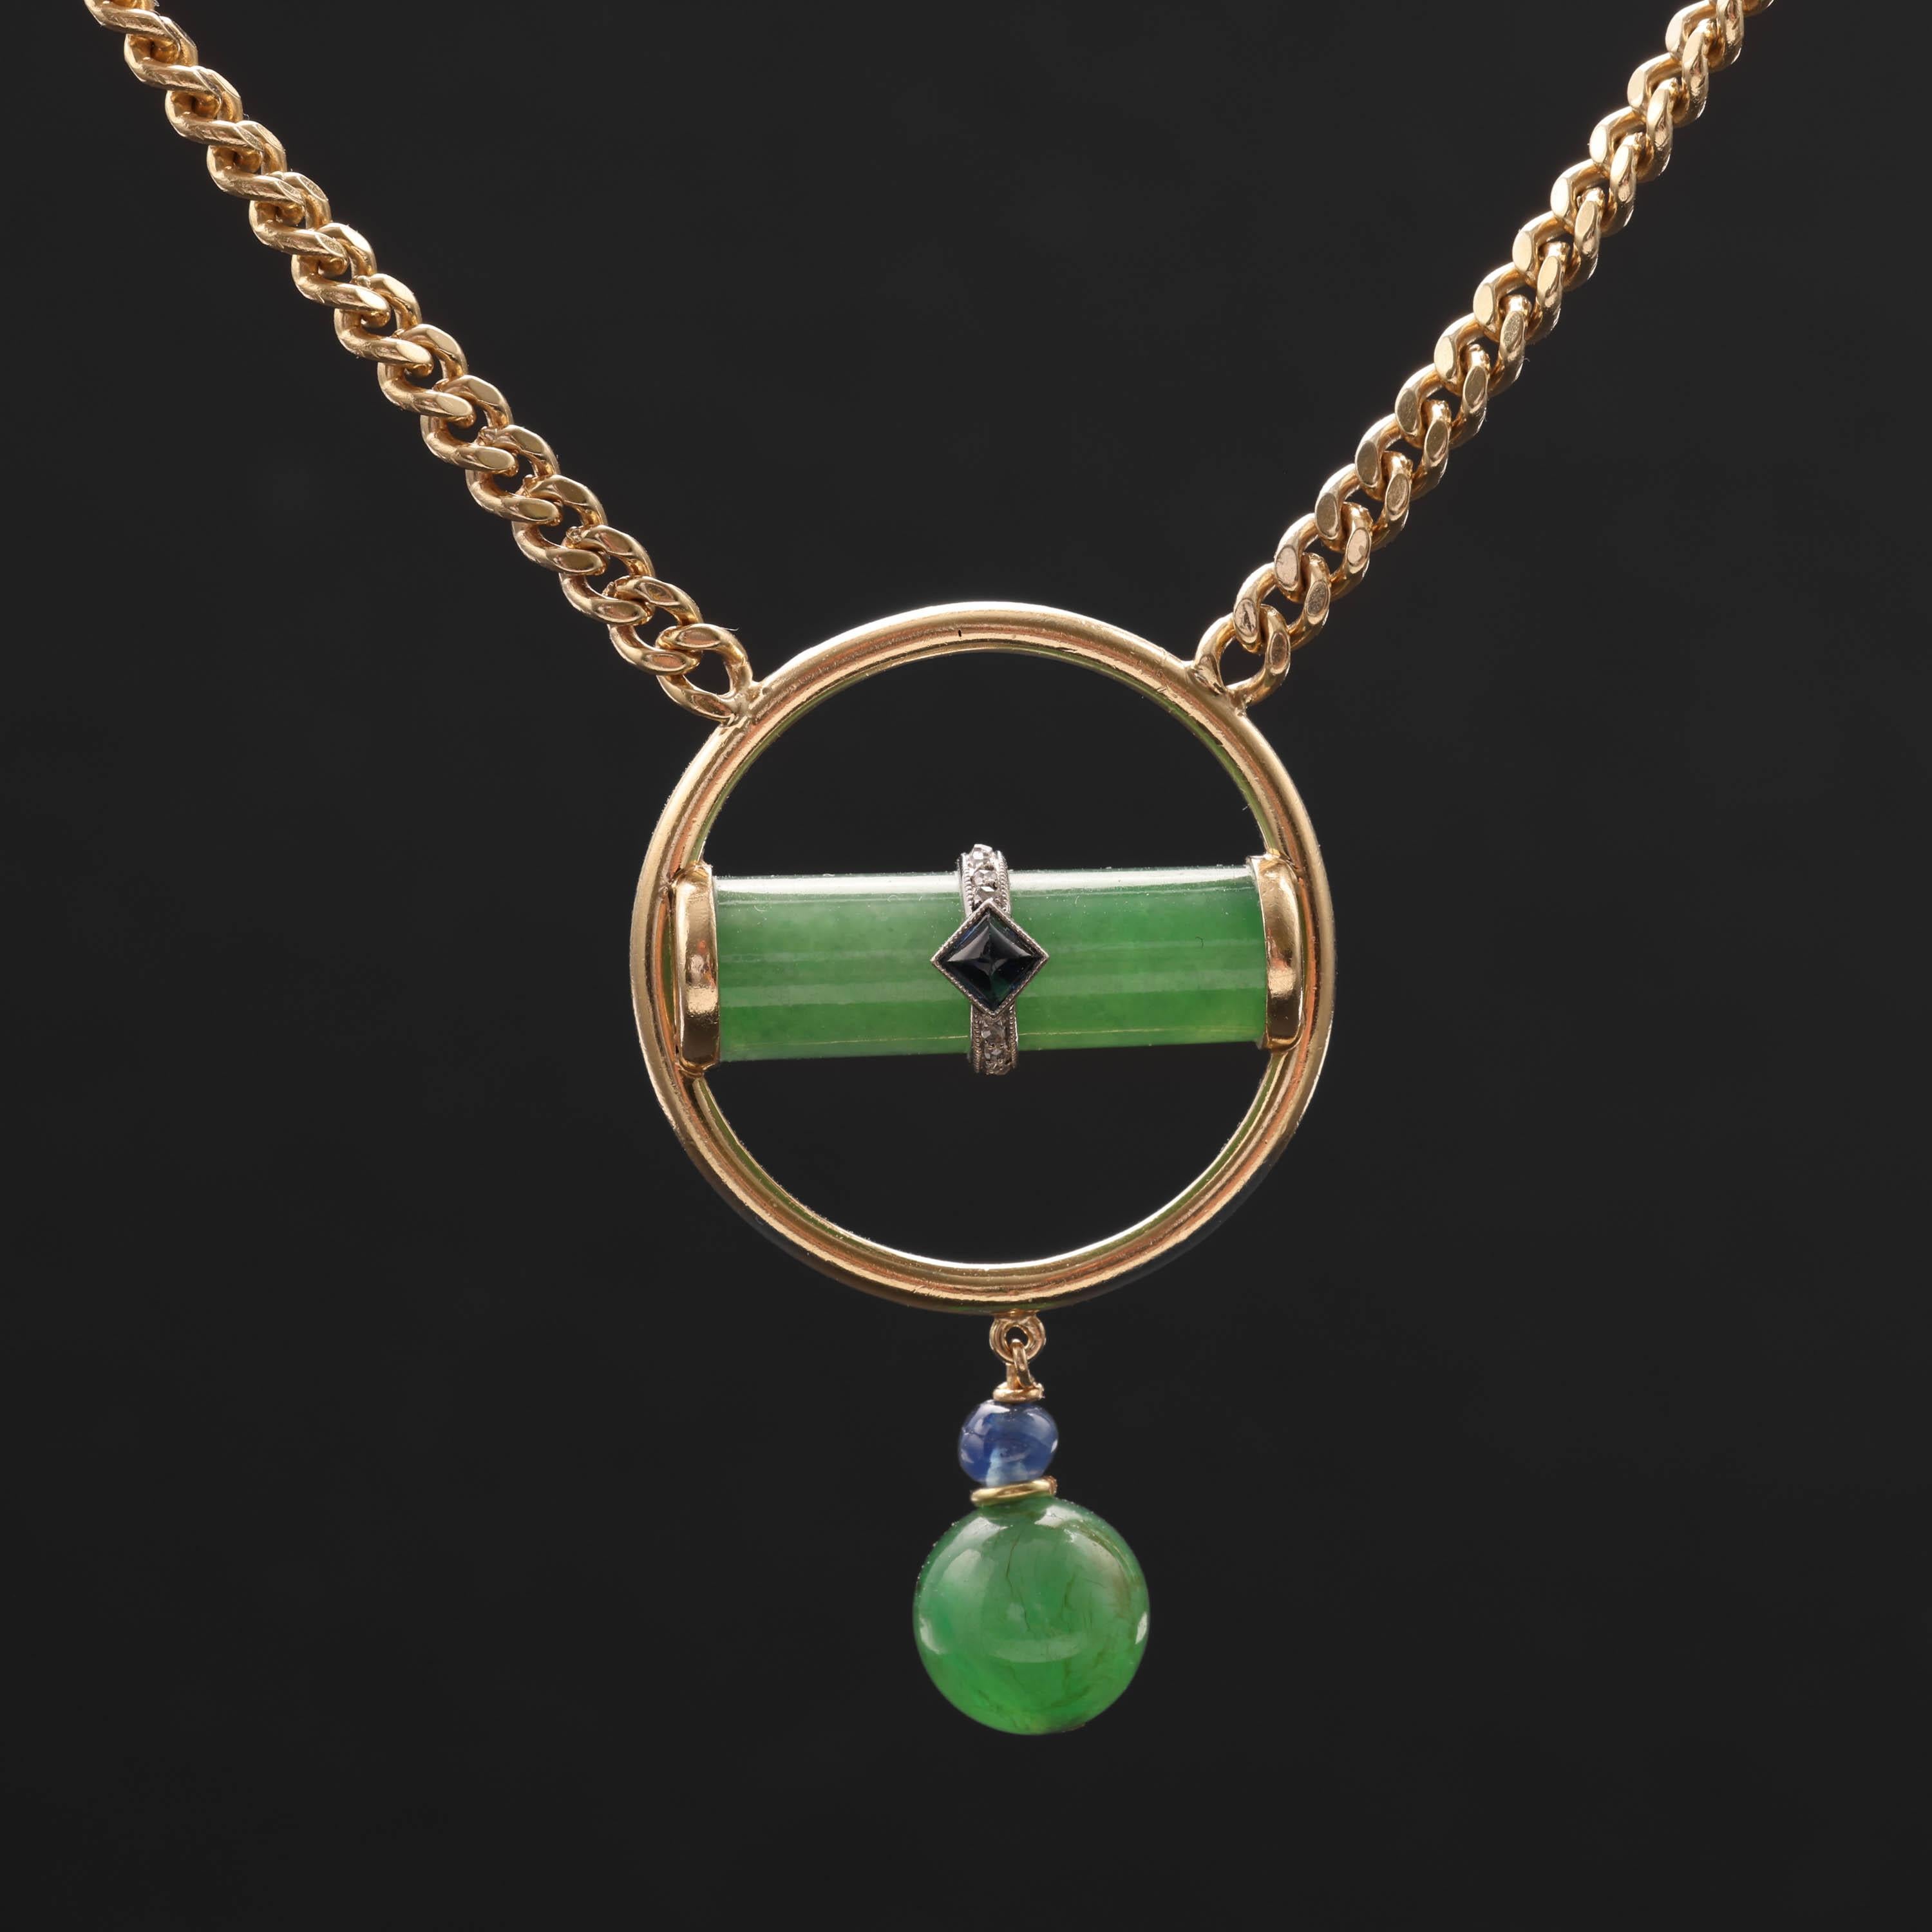 A stunning jade pendant featuring an apple-green cylinder of certified natural and untreated jadeite jade, wrapped in a slender platinum band and set with several tiny white diamonds. A sugarloaf cabochon sapphire is set neatly in the center. A hoop